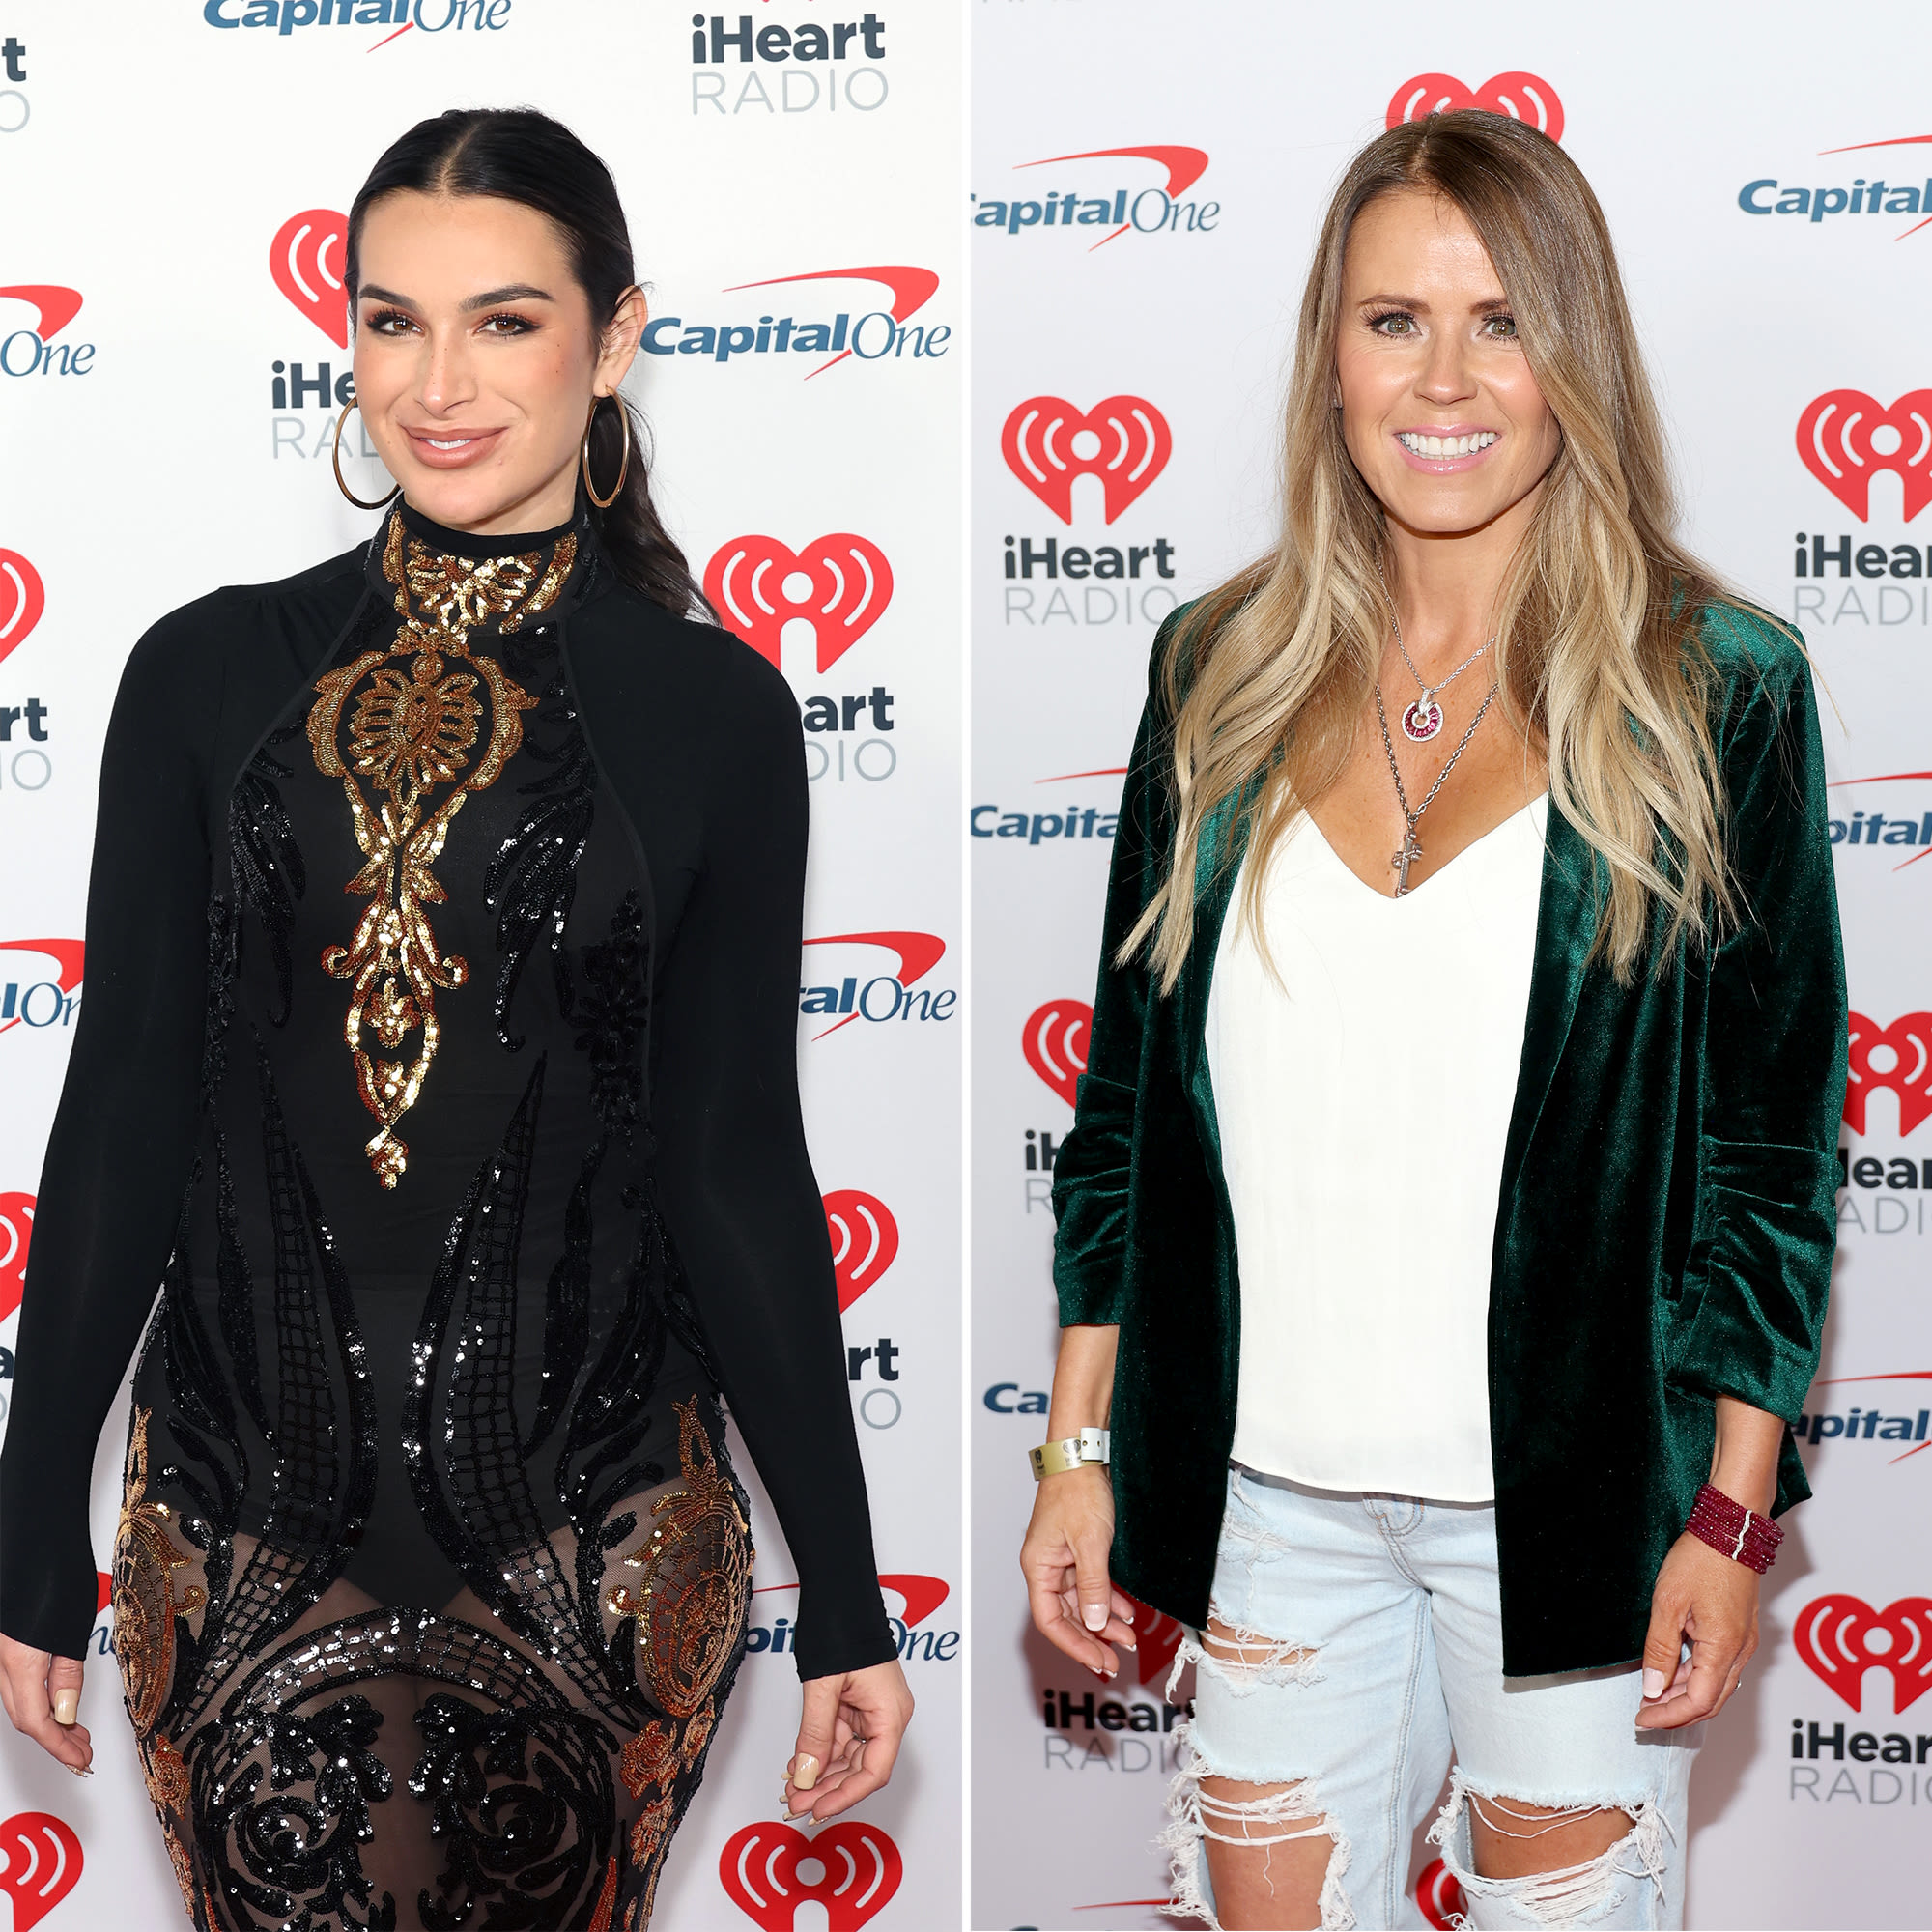 Ashley Iaconetti Thinks Trista Sutter Confirmed ‘Special Forces’ Casting